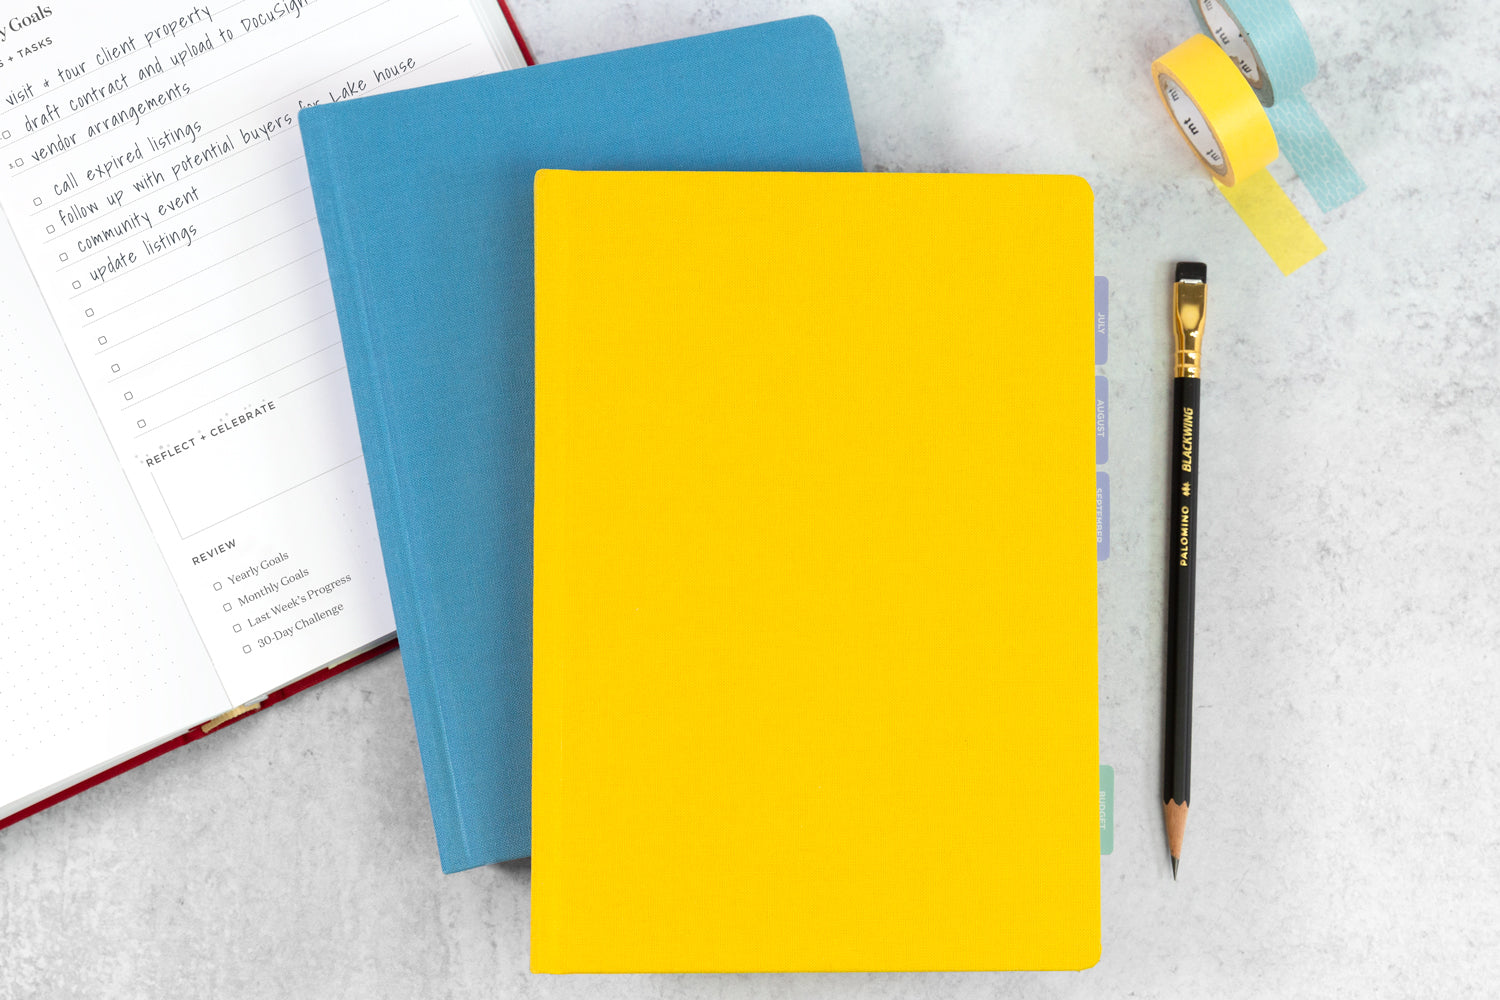 A bright blue planner and a bright yellow planner stacked on a white desk next to a black pencil and to-do list